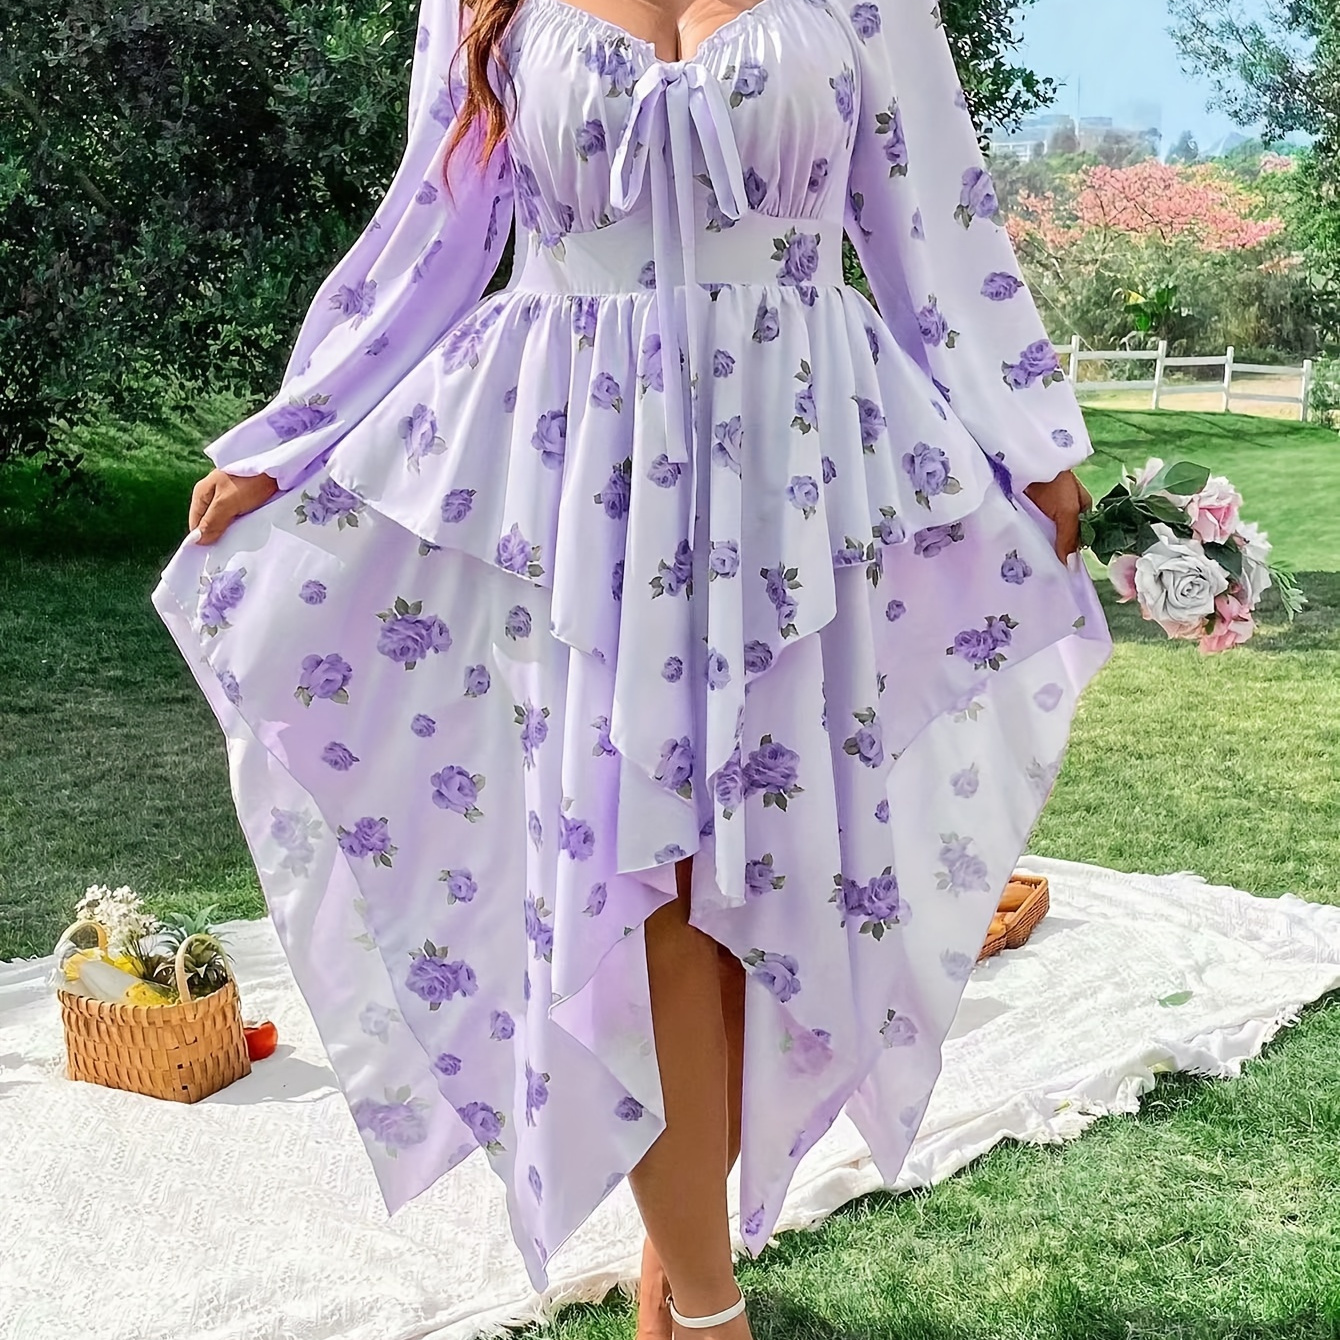 

Plus Size Floral Pattern Asymmetrical Hem Dress, Vacation Style Shirred Long Sleeve Cinched Waist Tie Neck Dress For Spring & Fall, Women's Plus Size Clothing